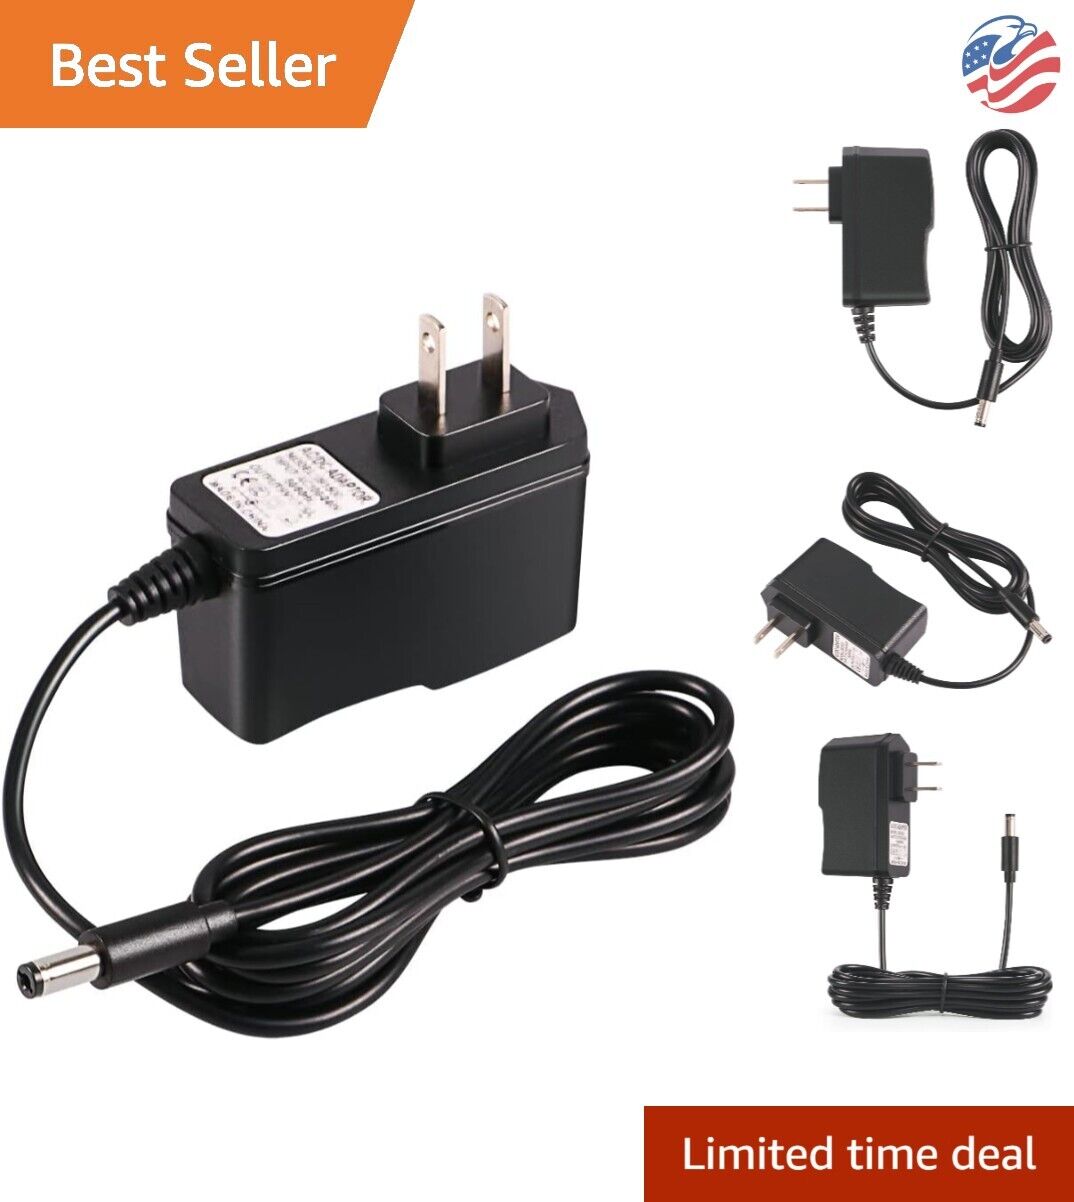 12V AC/DC Power Supply Adapter - Celestron Telescope Compatible - 10ft Cable